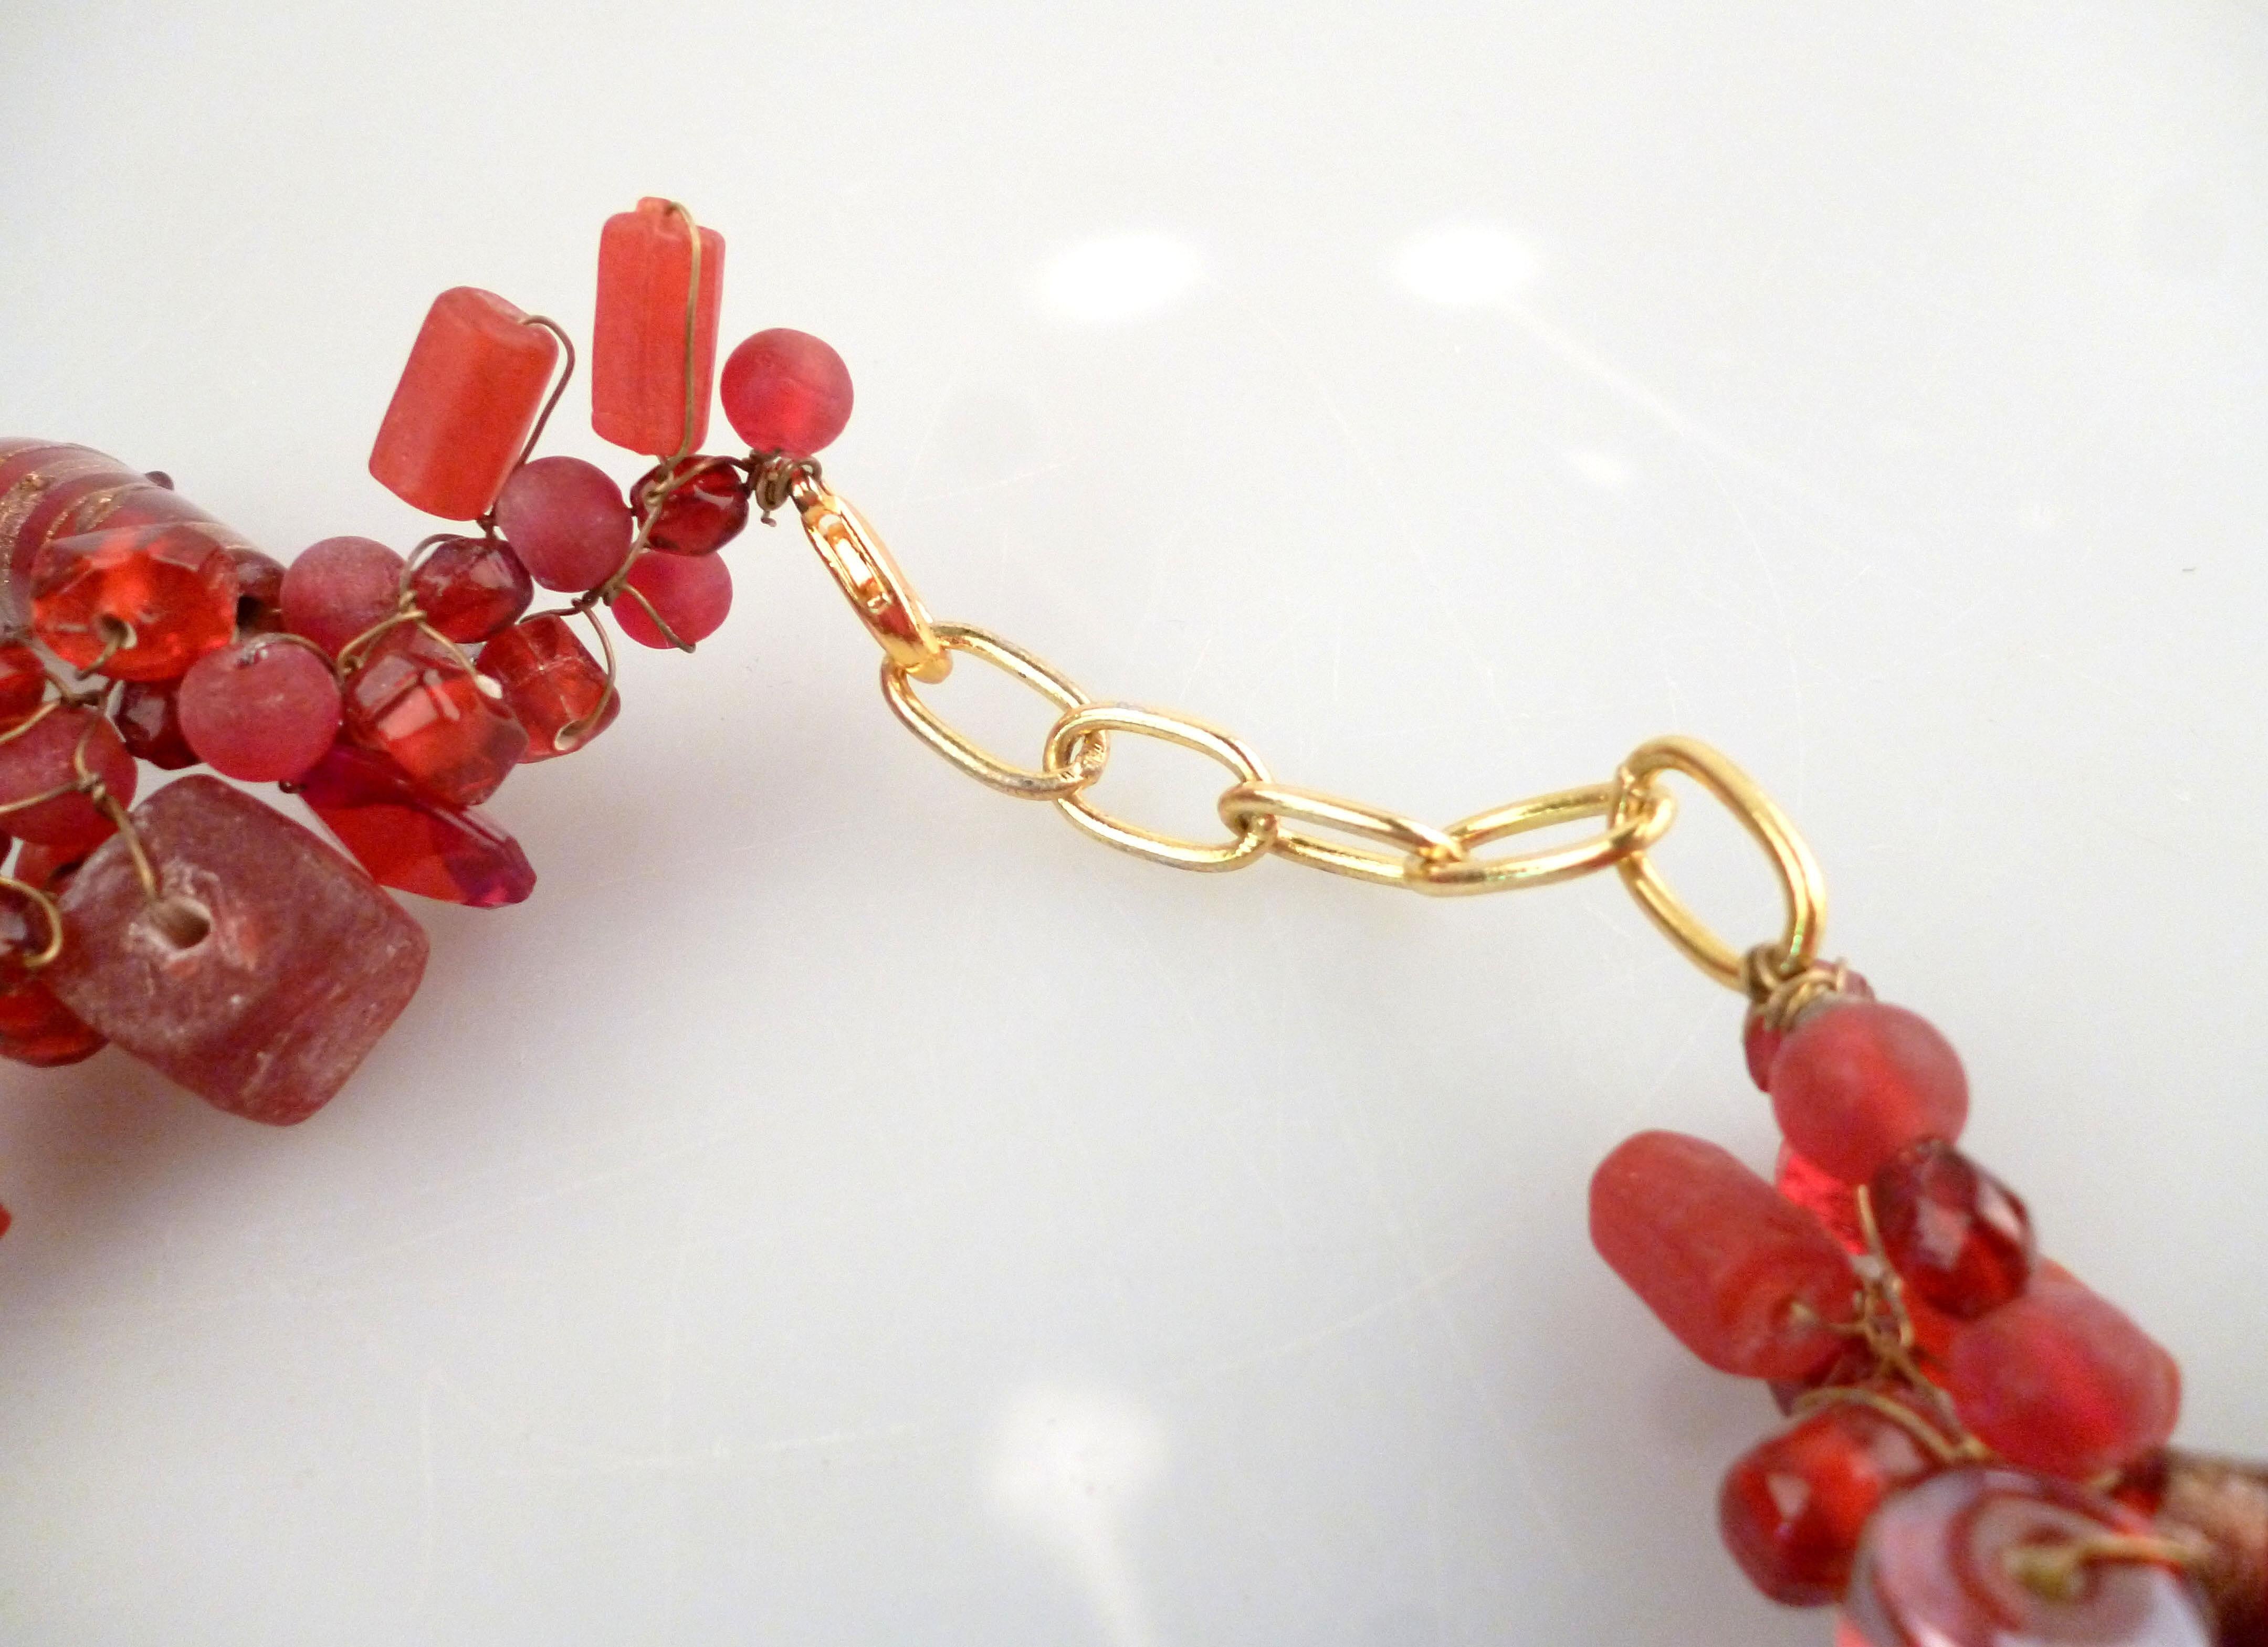 Vintage Handcrafted Murano Red Glass Ornament Necklace In Good Condition For Sale In Miami, FL